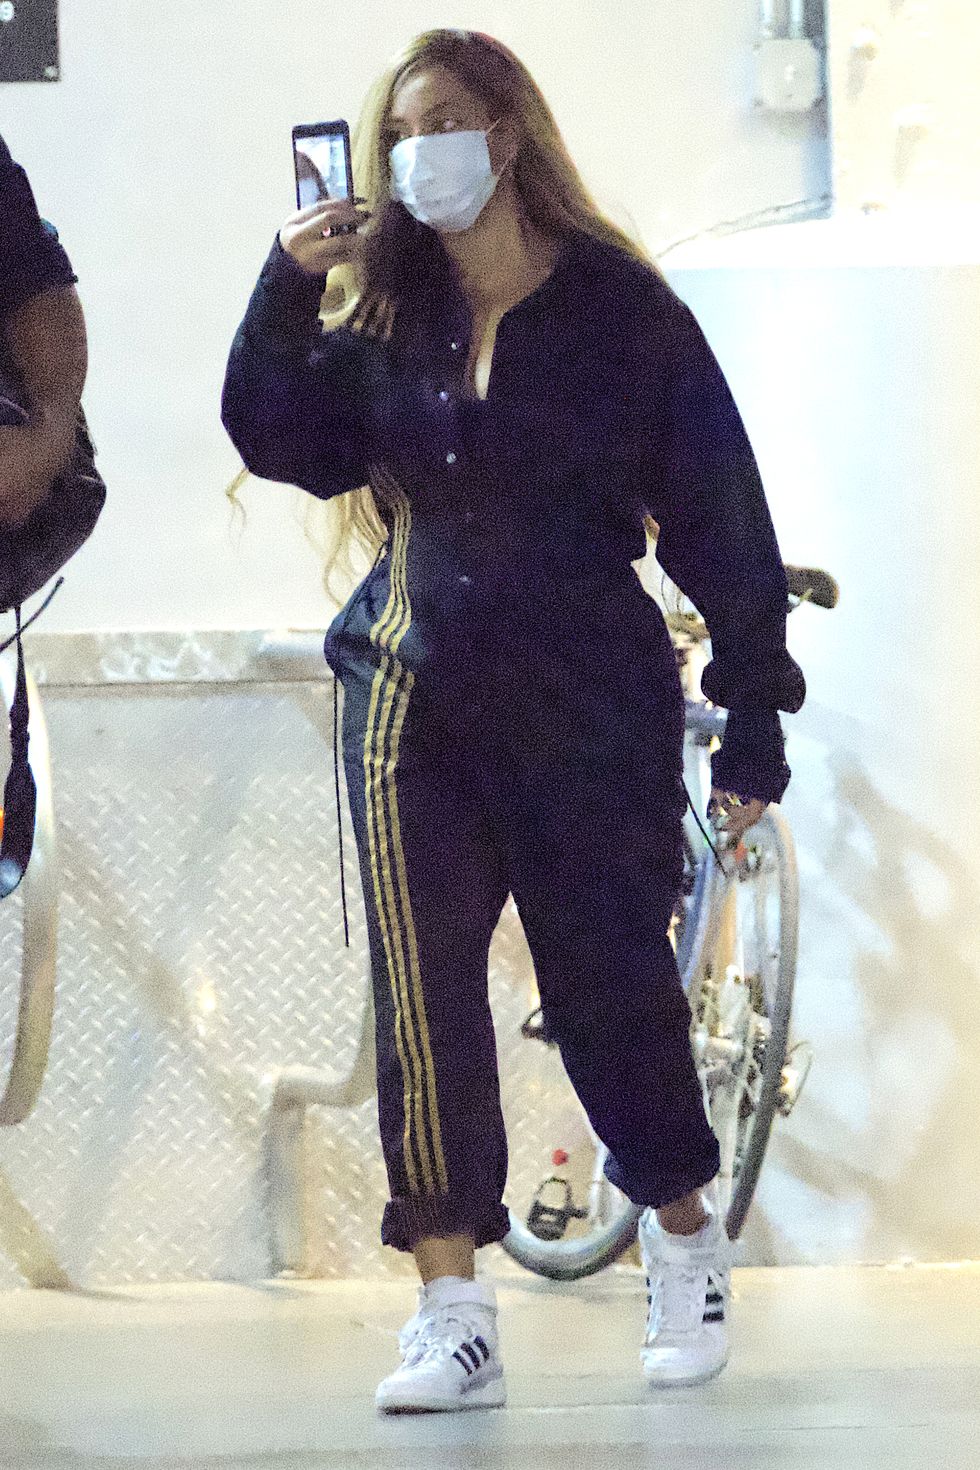 exclusive beyonce was spotted out in nyc over the weekend, as she took part in an adidas photoshoot, for her upcoming collaboration with the brand queen bey was inside the manhattan studio for 8 hours, before emerging in a black and gold tracksuit she showed off her fuller frame, and curvy figure, all while taking selfies on her iphone the star opted not to use the front camera, instead showing off a new technique, as she walked alongside her tall bodyguard 23 aug 2020 pictured beyonce photo credit mega themegaagencycom 1 888 505 6342